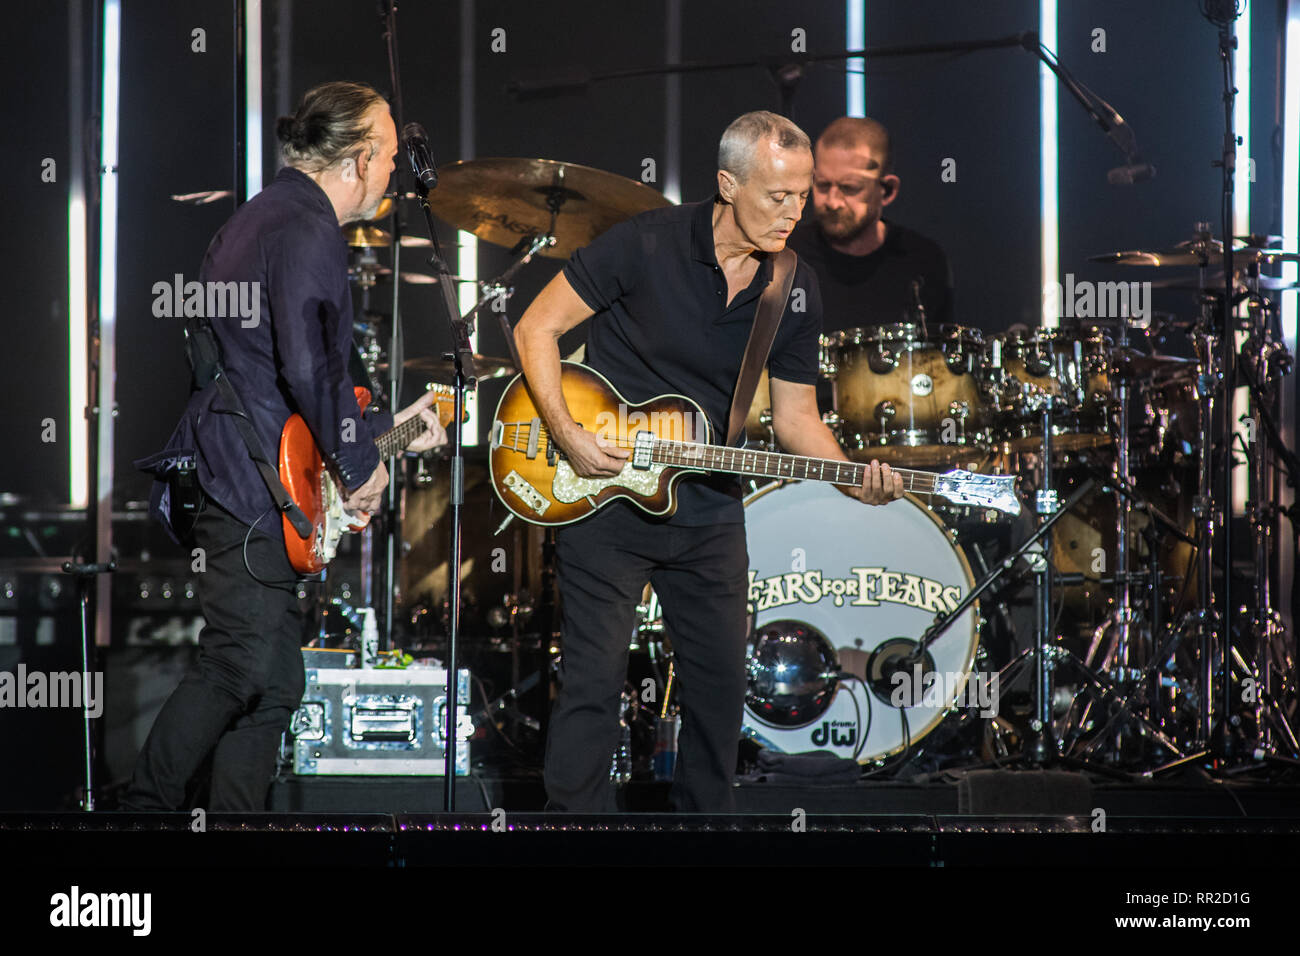 Milan Italy. 23 February 2019. The English pop rock band TEARS FOR FEARS  performs live on stage at Mediolanum Forum during the "Rule The World Tour  2019". Credit: Rodolfo Sassano/Alamy Live News